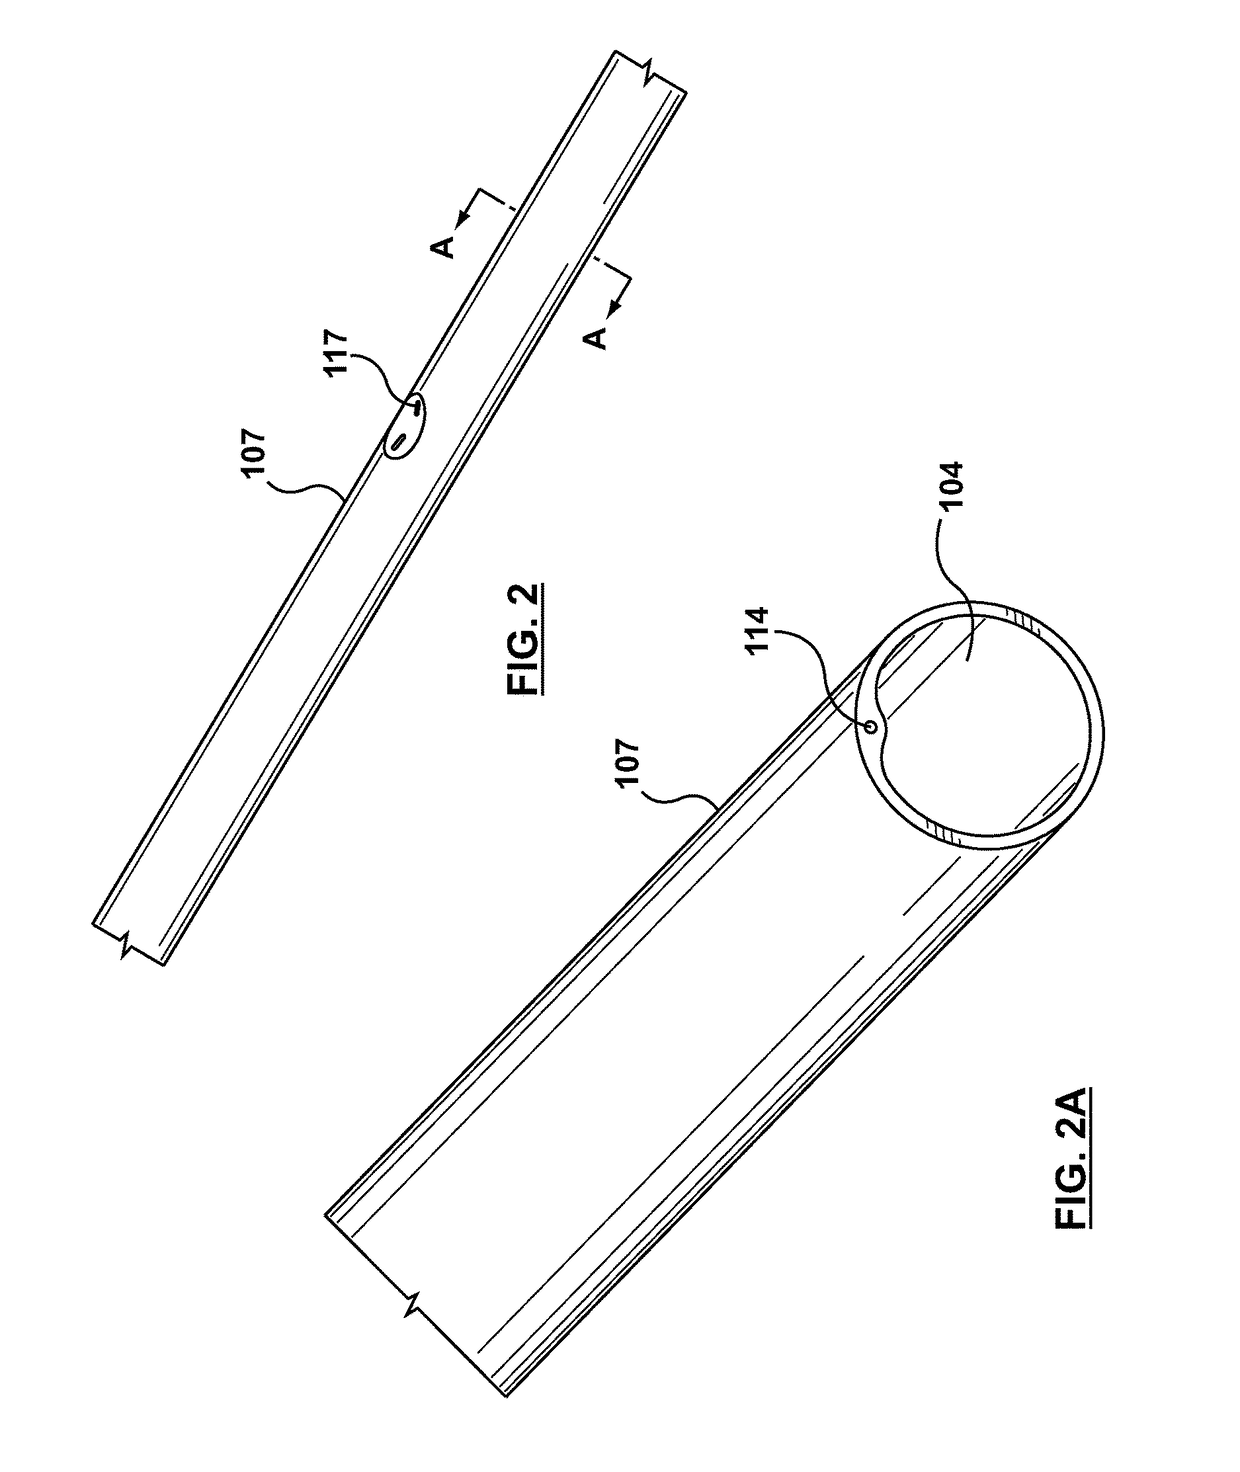 Catheter pull wire actuation mechanism